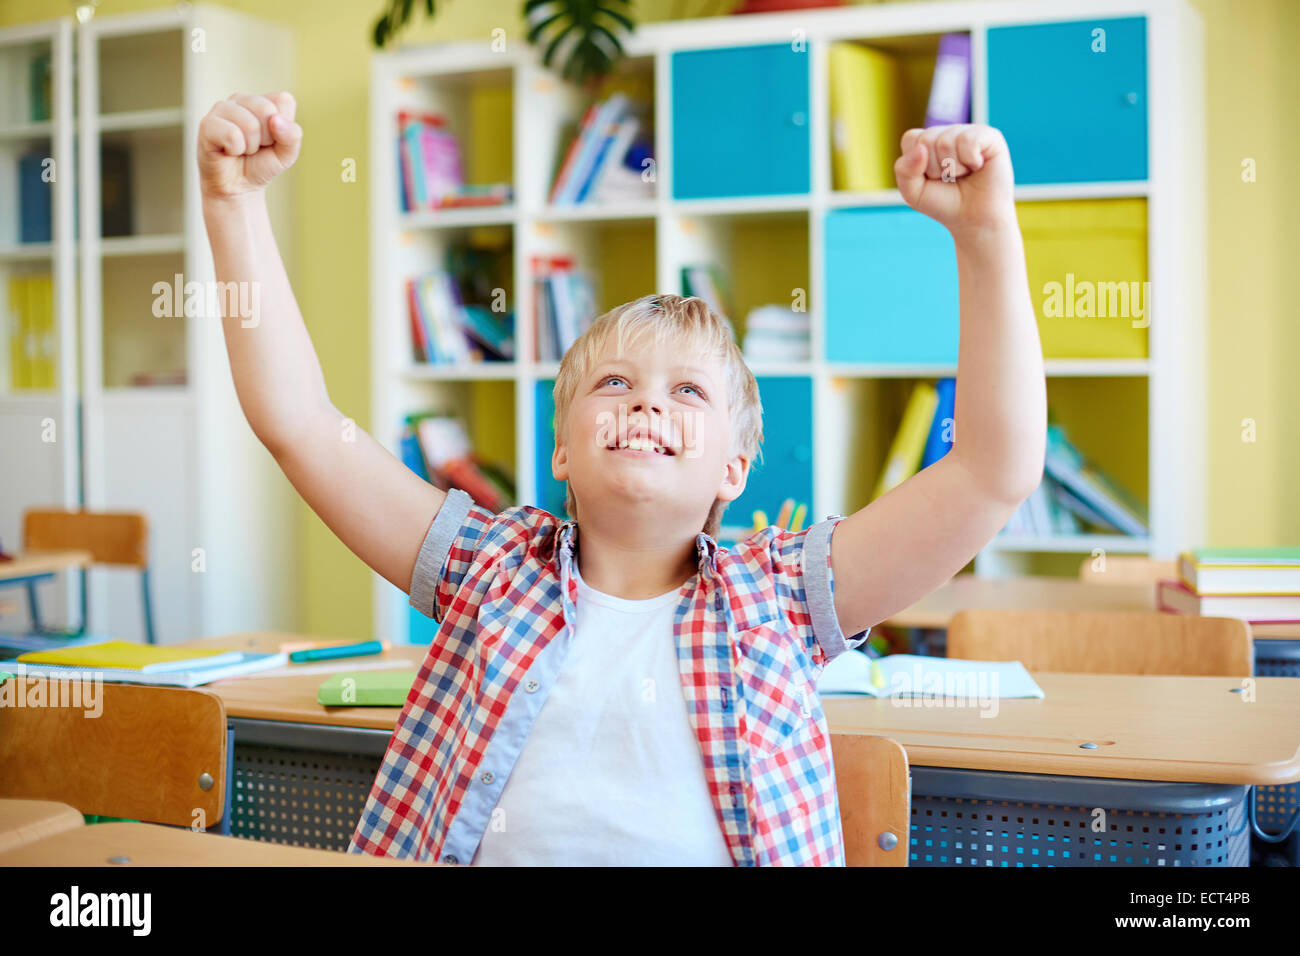 Ecstatic schoolboy expressing gladness by his workplace Stock Photo